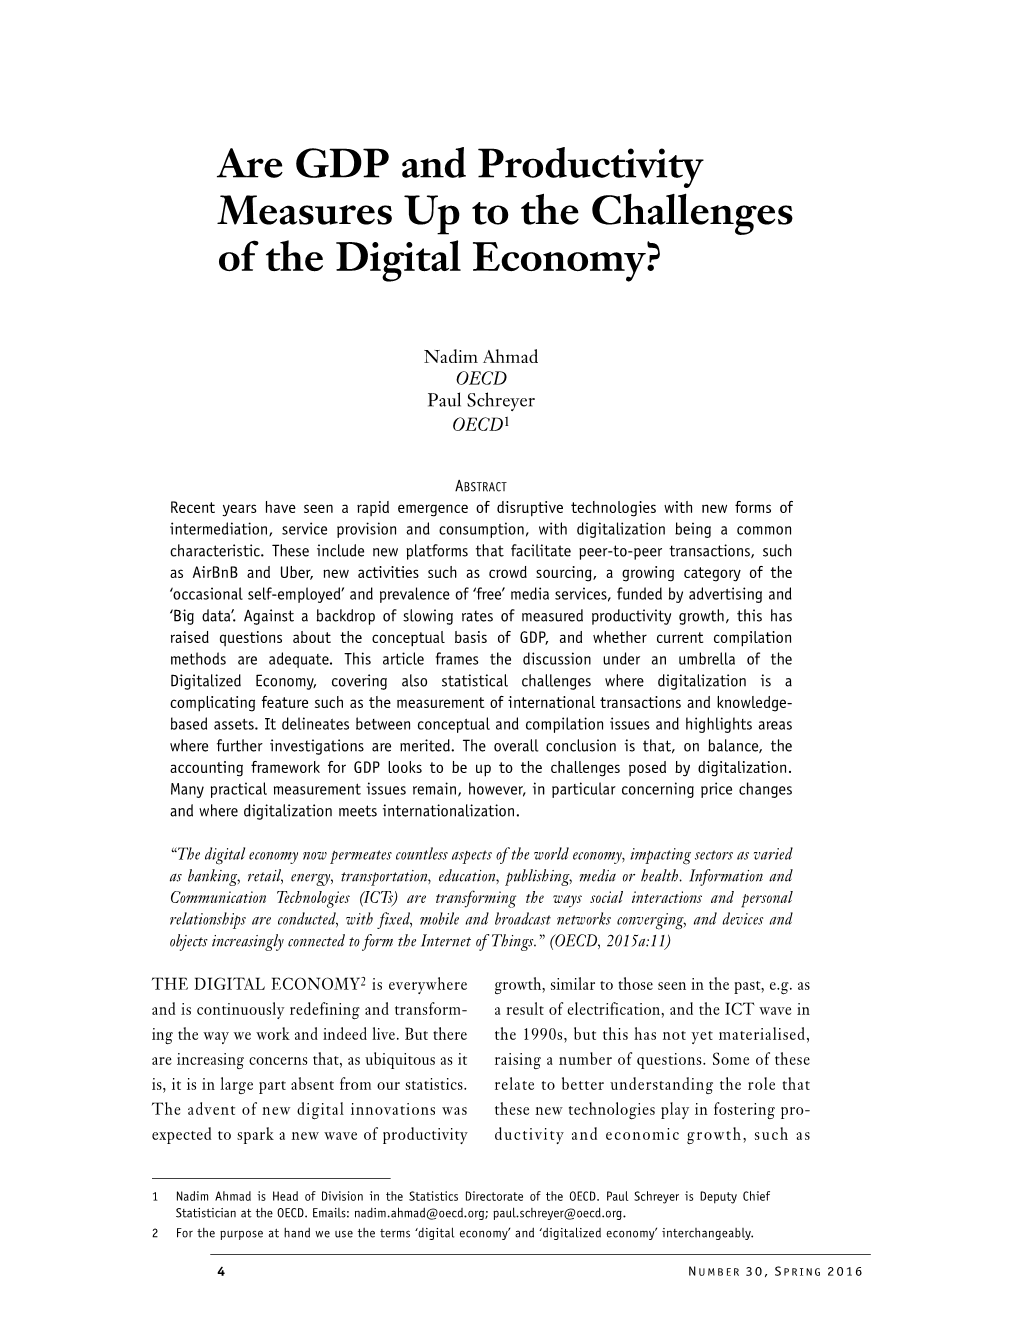 Are GDP and Productivity Measures up to the Challenges of the Digital Economy?